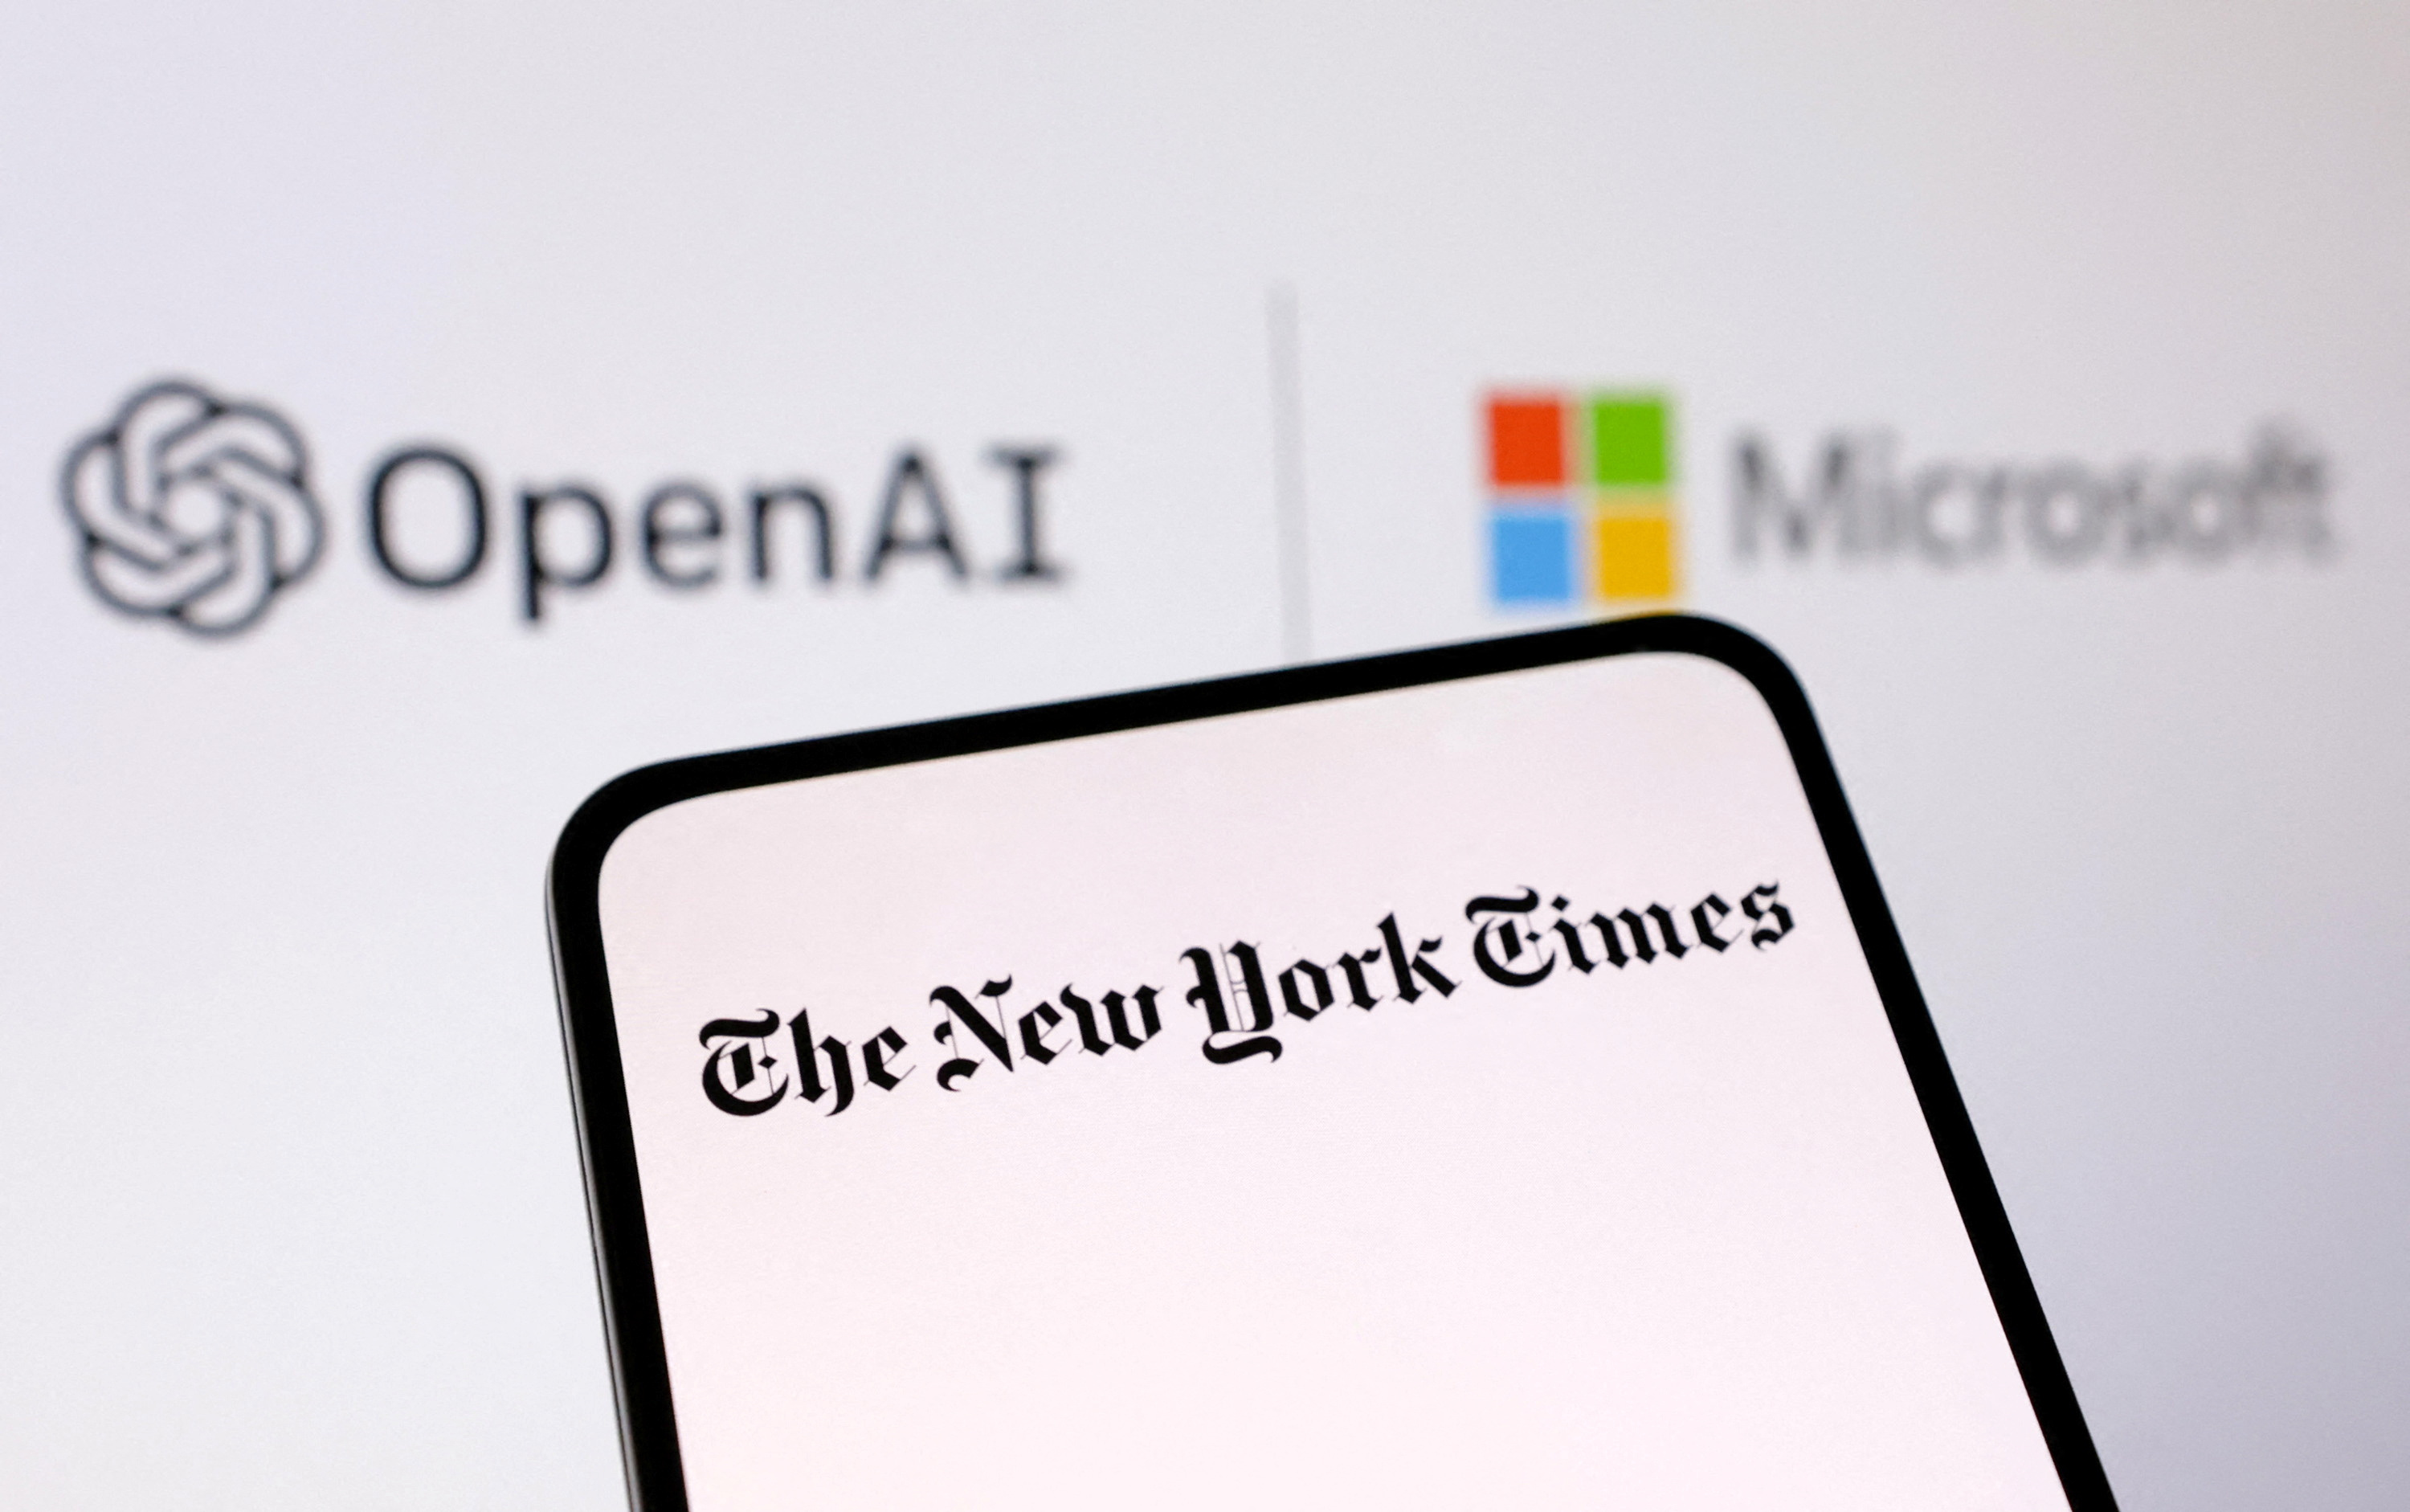 NY Times sues OpenAI, Microsoft for infringing copyrighted works | Reuters